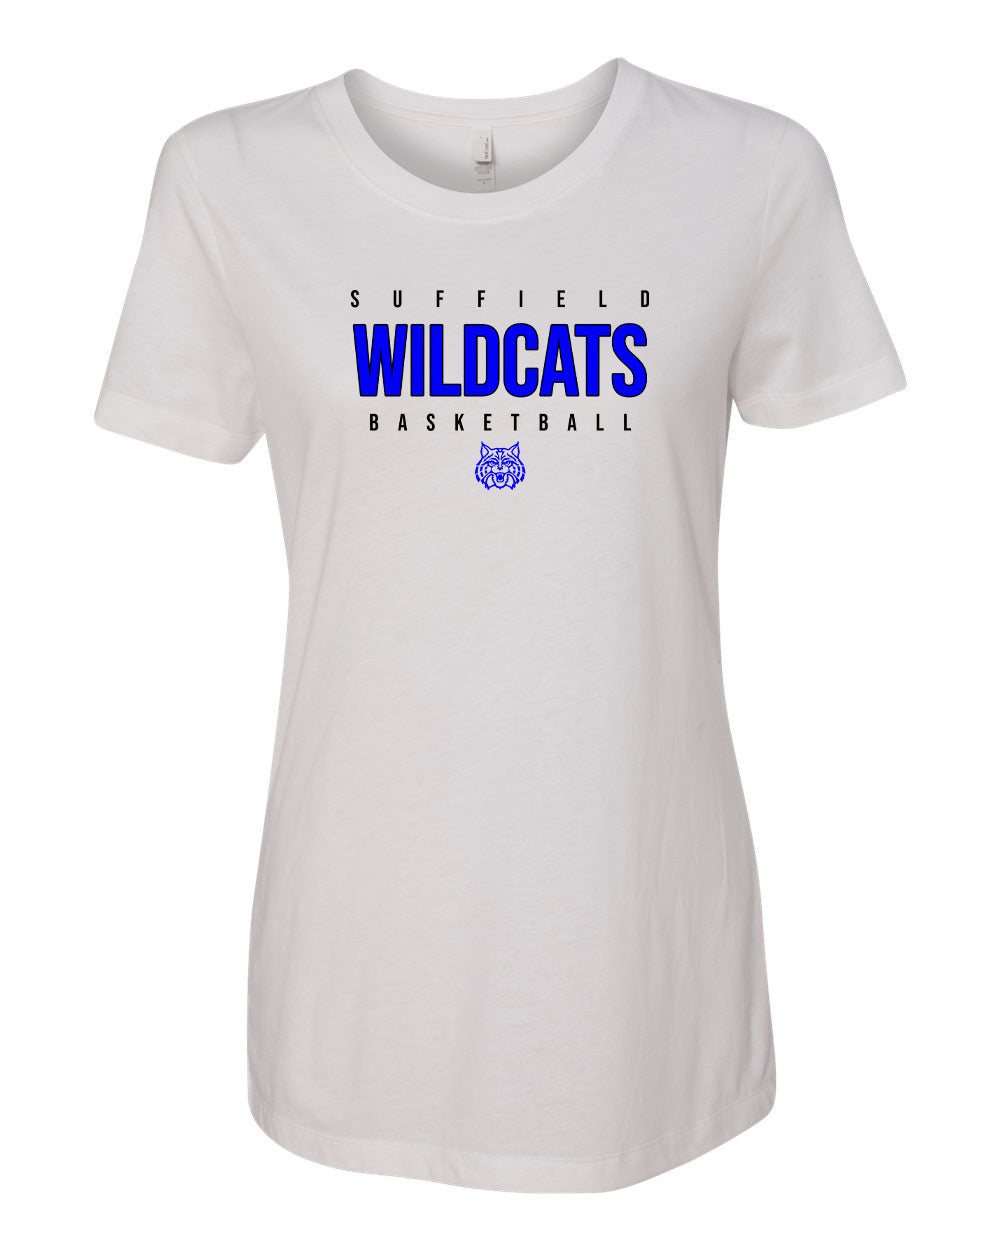 Suffield TB - Ladies T-shirt "STB" - 1510 (color options available)